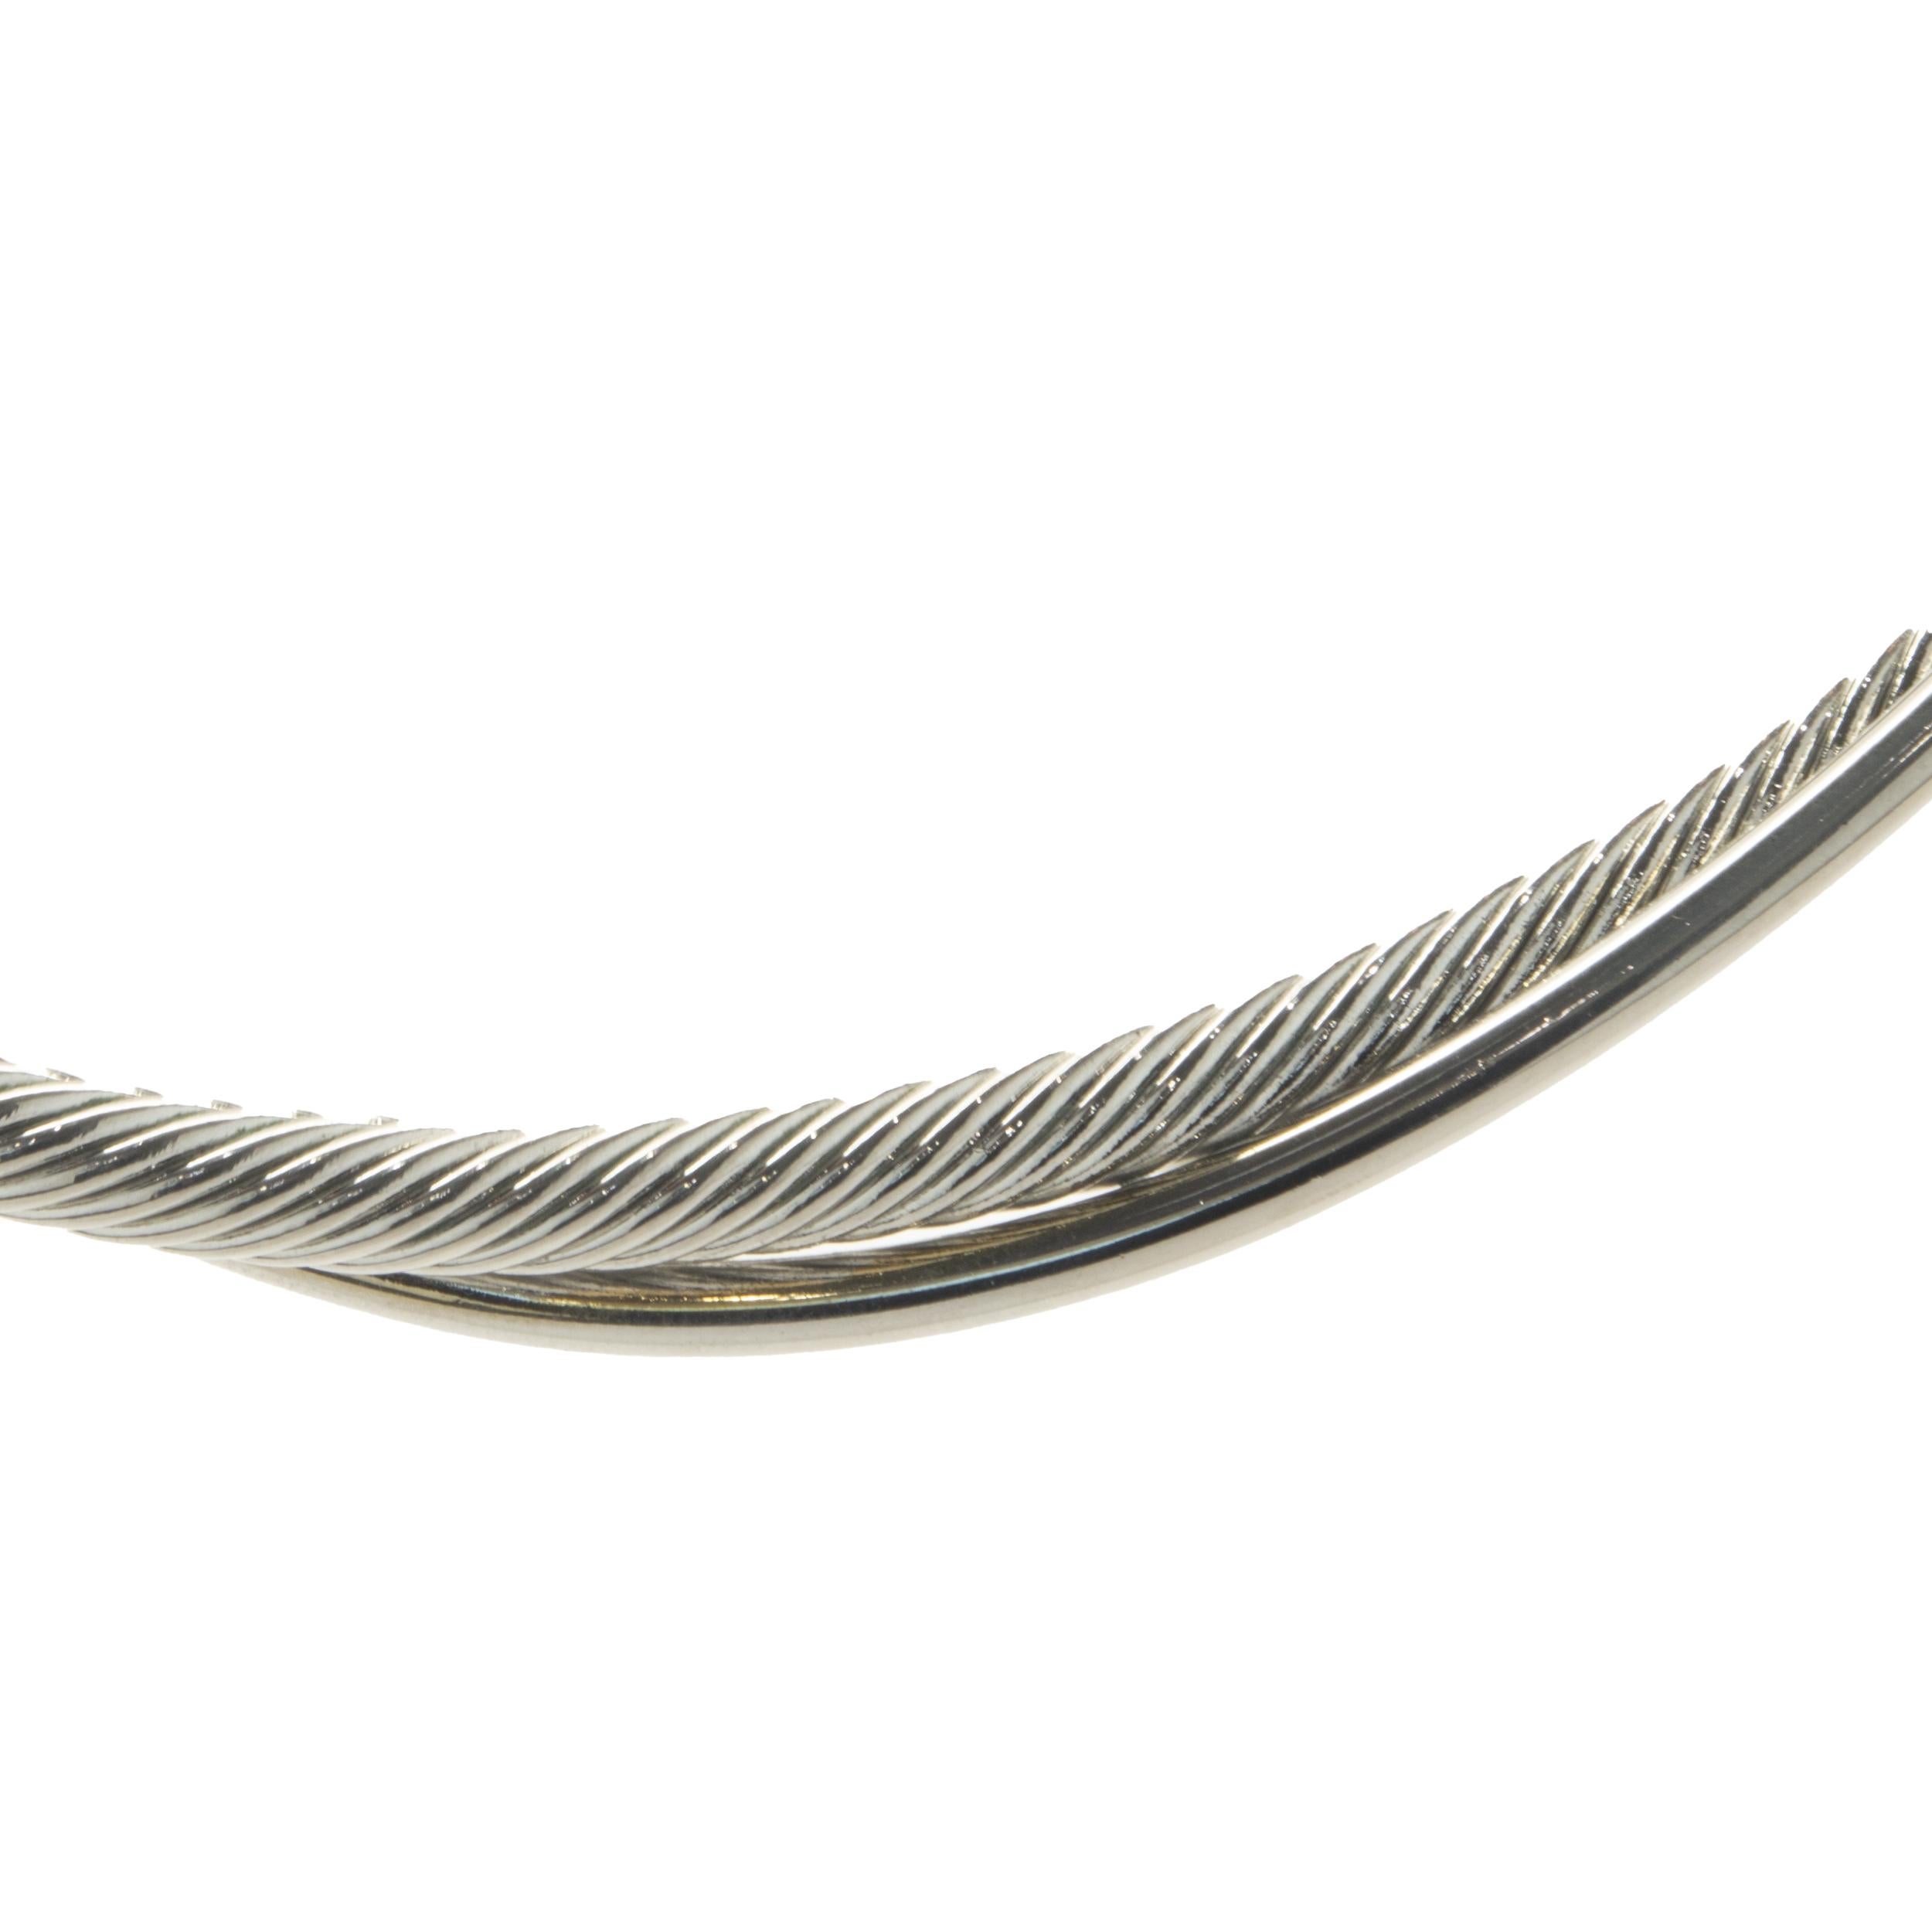 Designer: David Yurman
Material: sterling silver 
Dimensions: collar measures 16-inches
Weight: 48.50 grams
